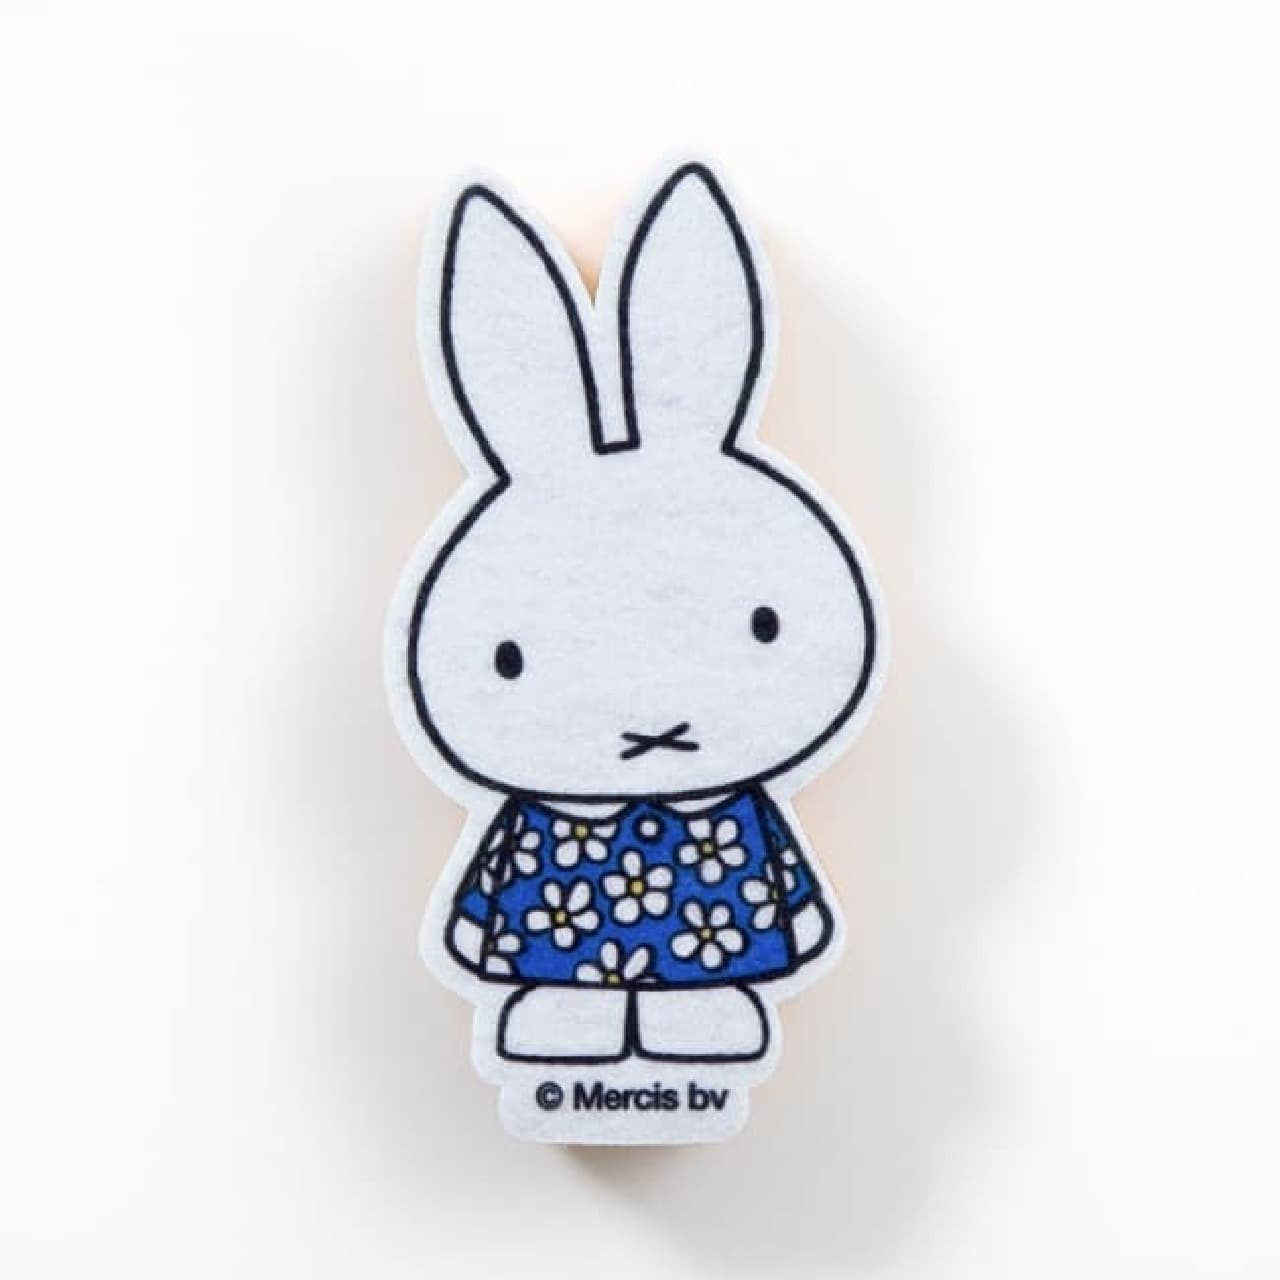 Collaboration between Miffy and salut!